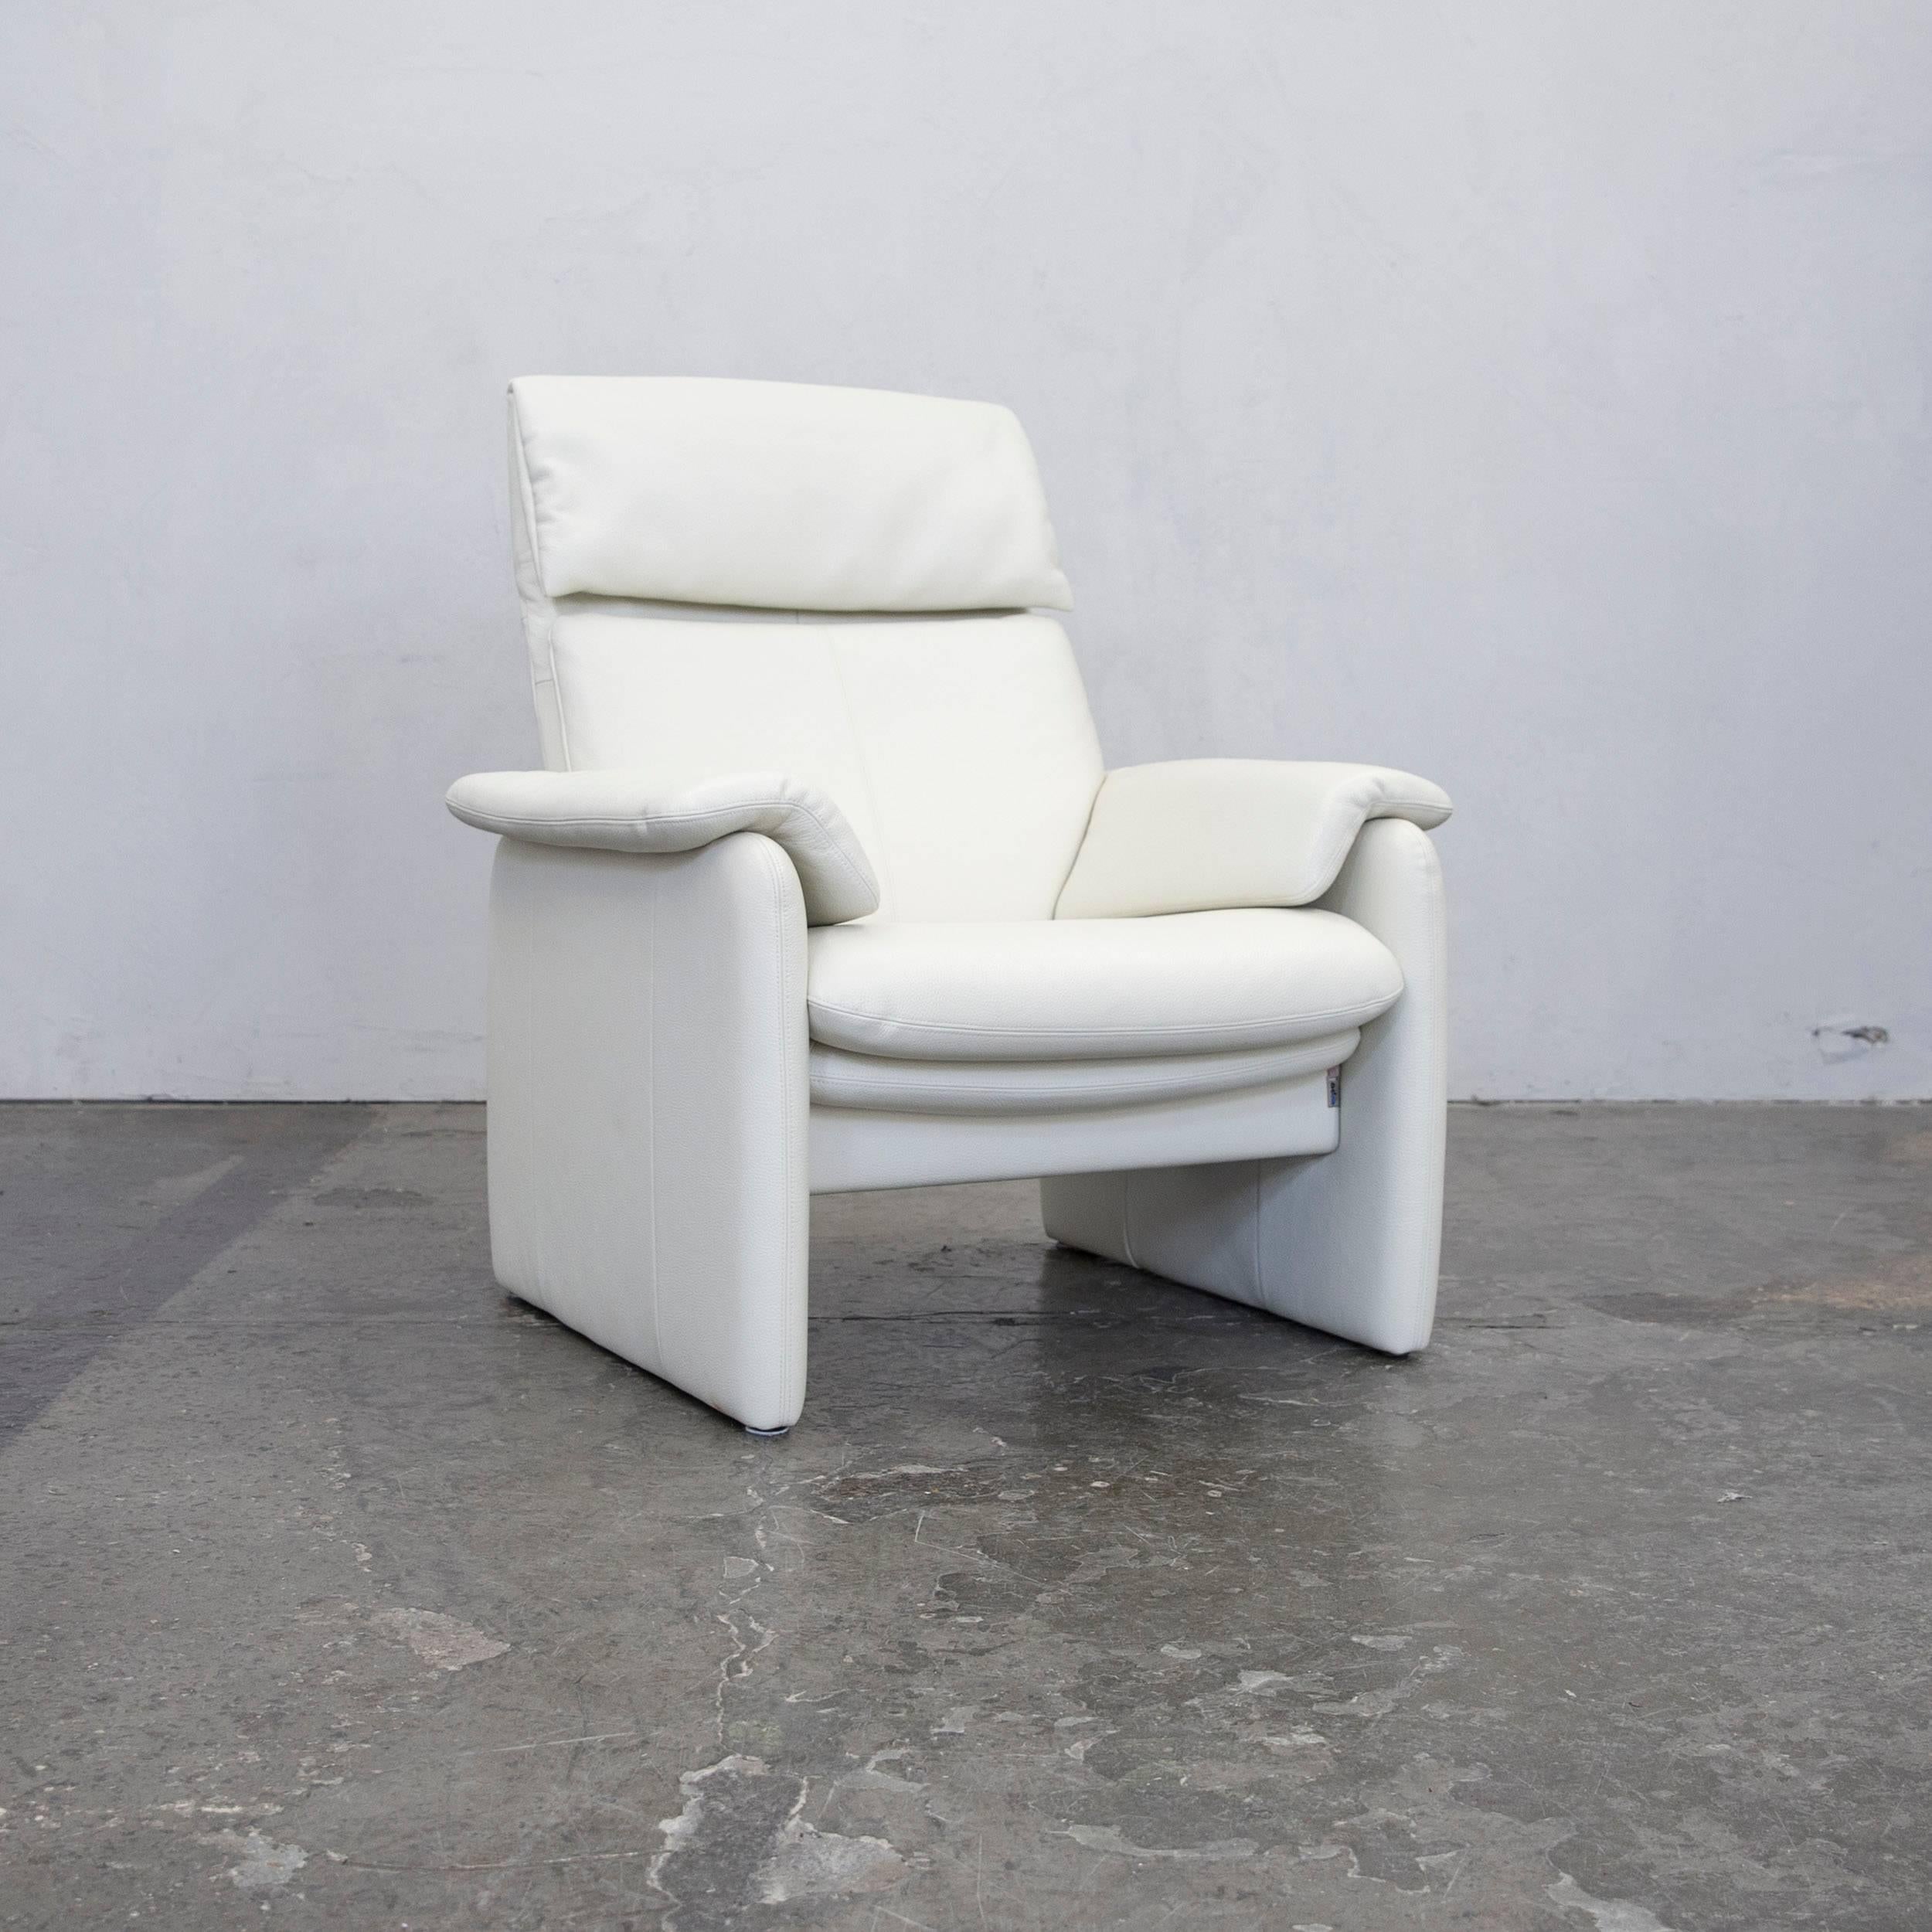 Crème white colored original Erpo Lugano designer leather armchair in a minimalistic and modern design, with convenient functions, made for pure comfort and flexibility.